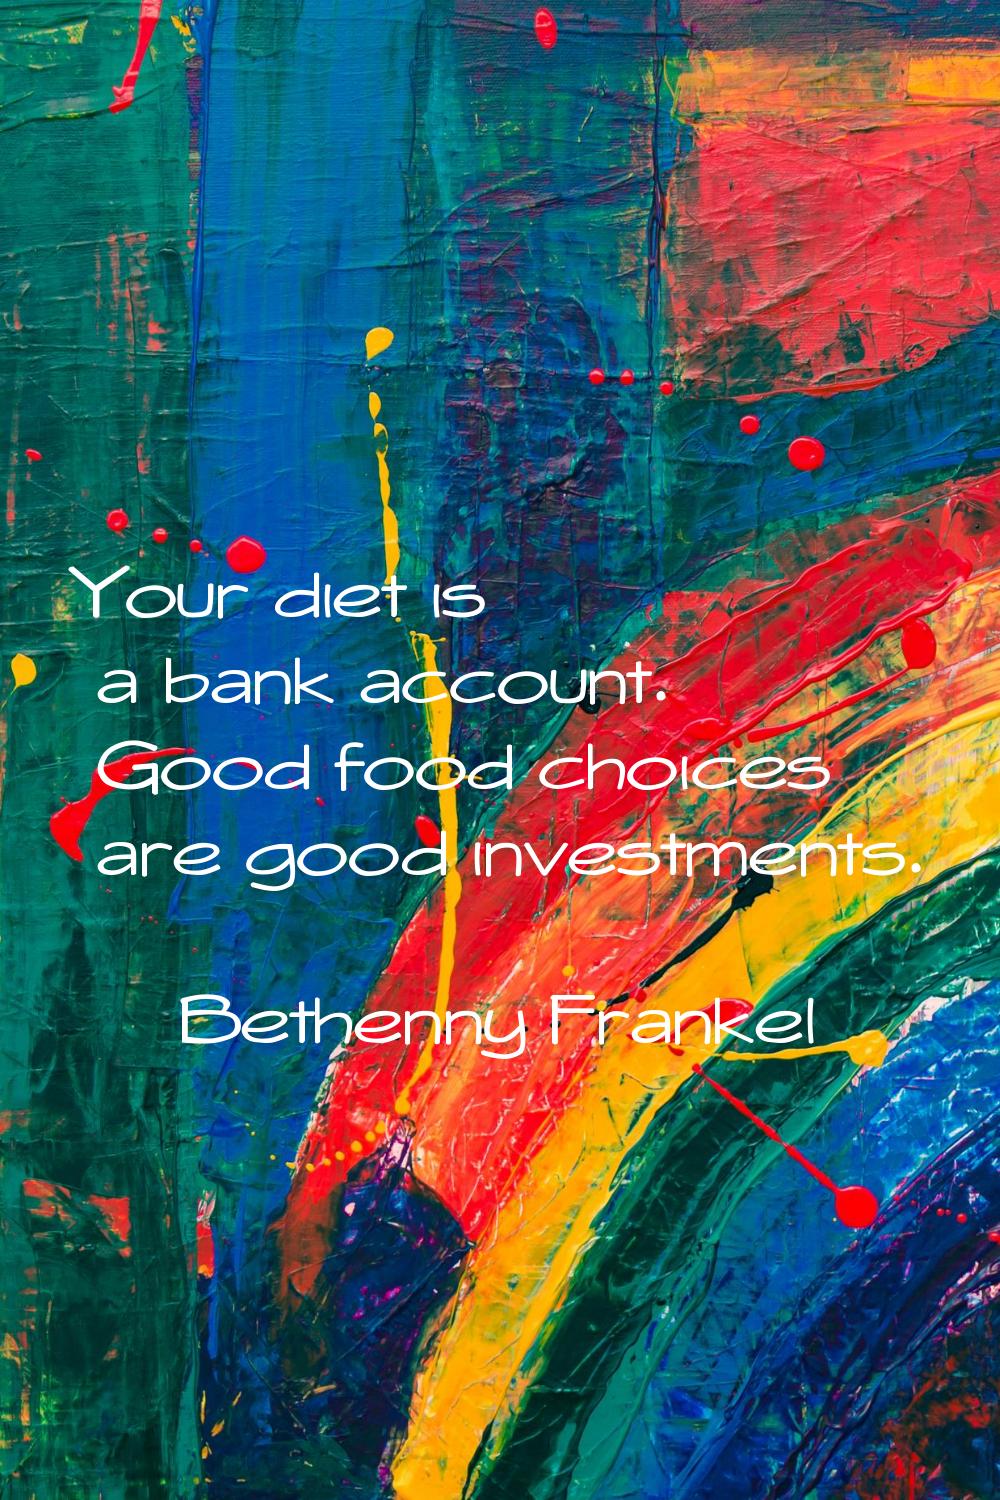 Your diet is a bank account. Good food choices are good investments.